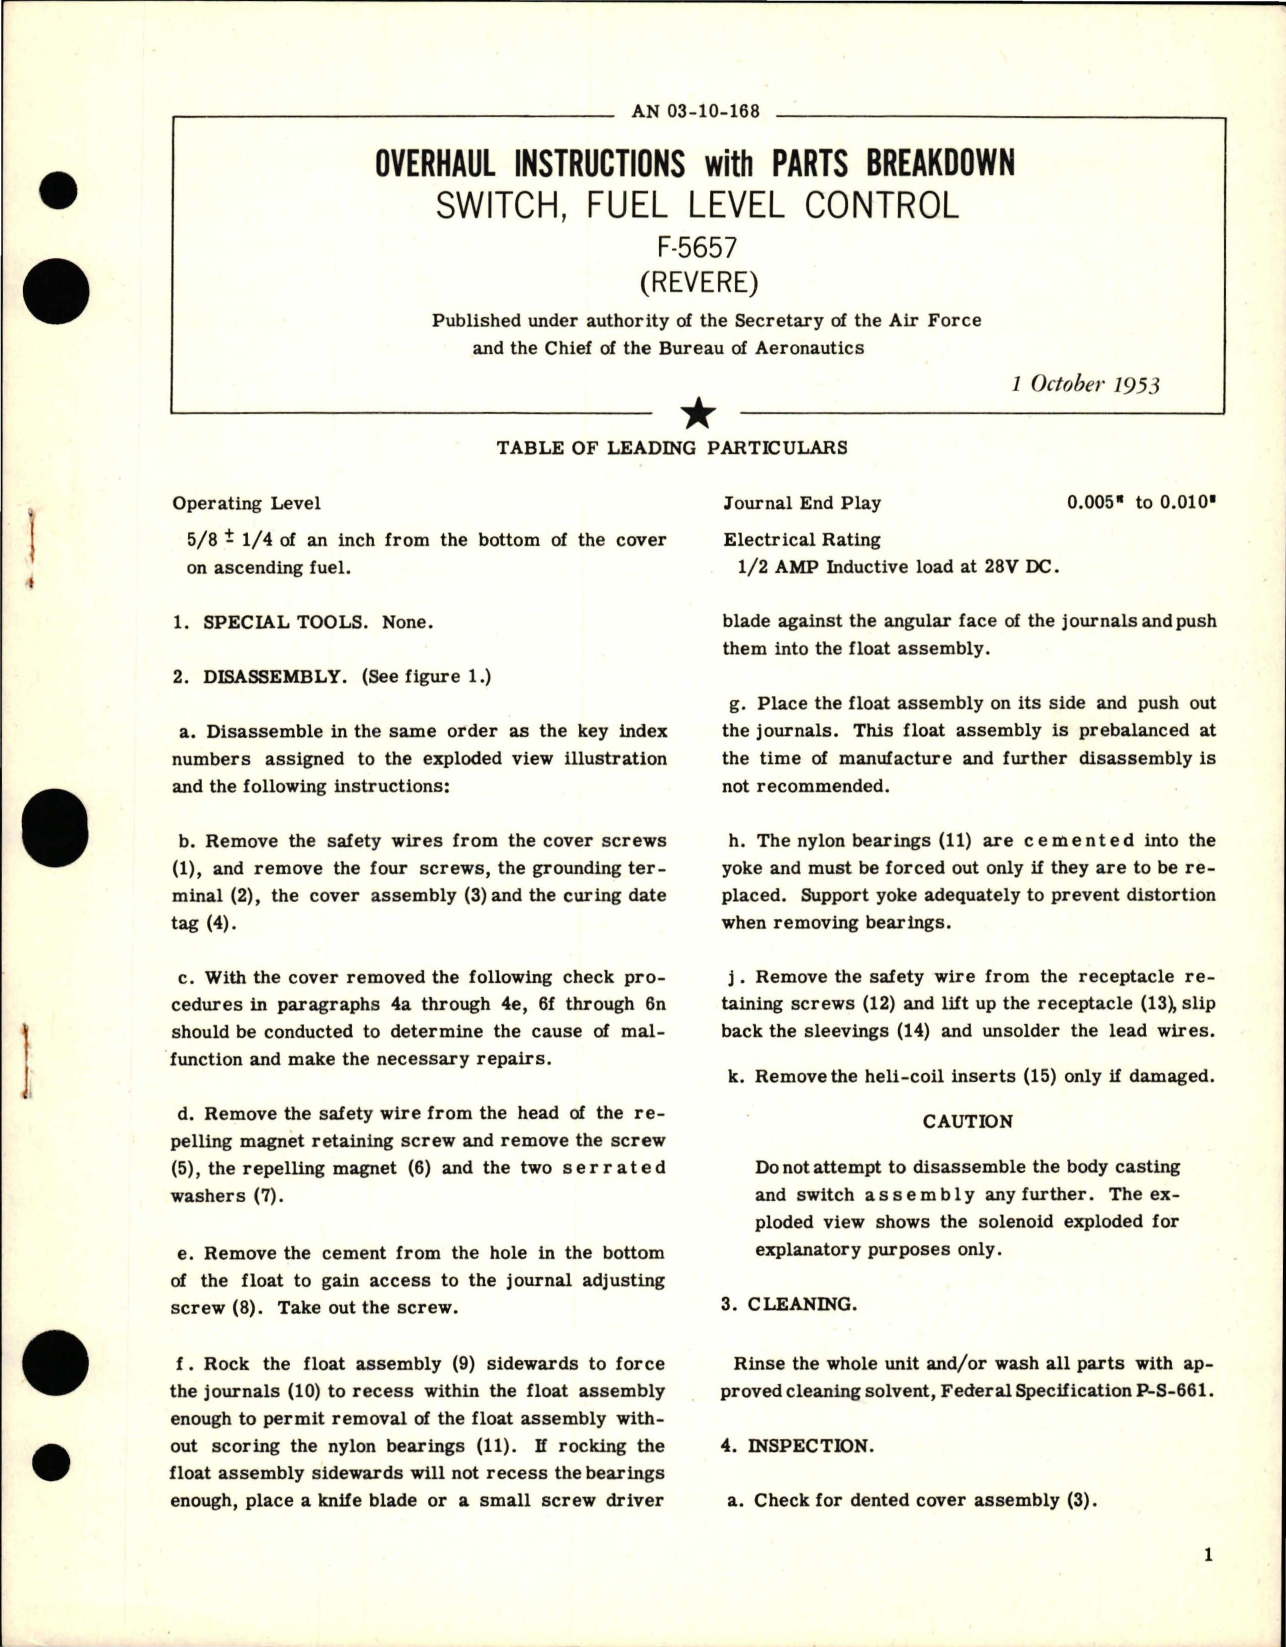 Sample page 1 from AirCorps Library document: Overhaul Instructions with Parts Breakdown for Fuel Level Control Switch - F-5657 